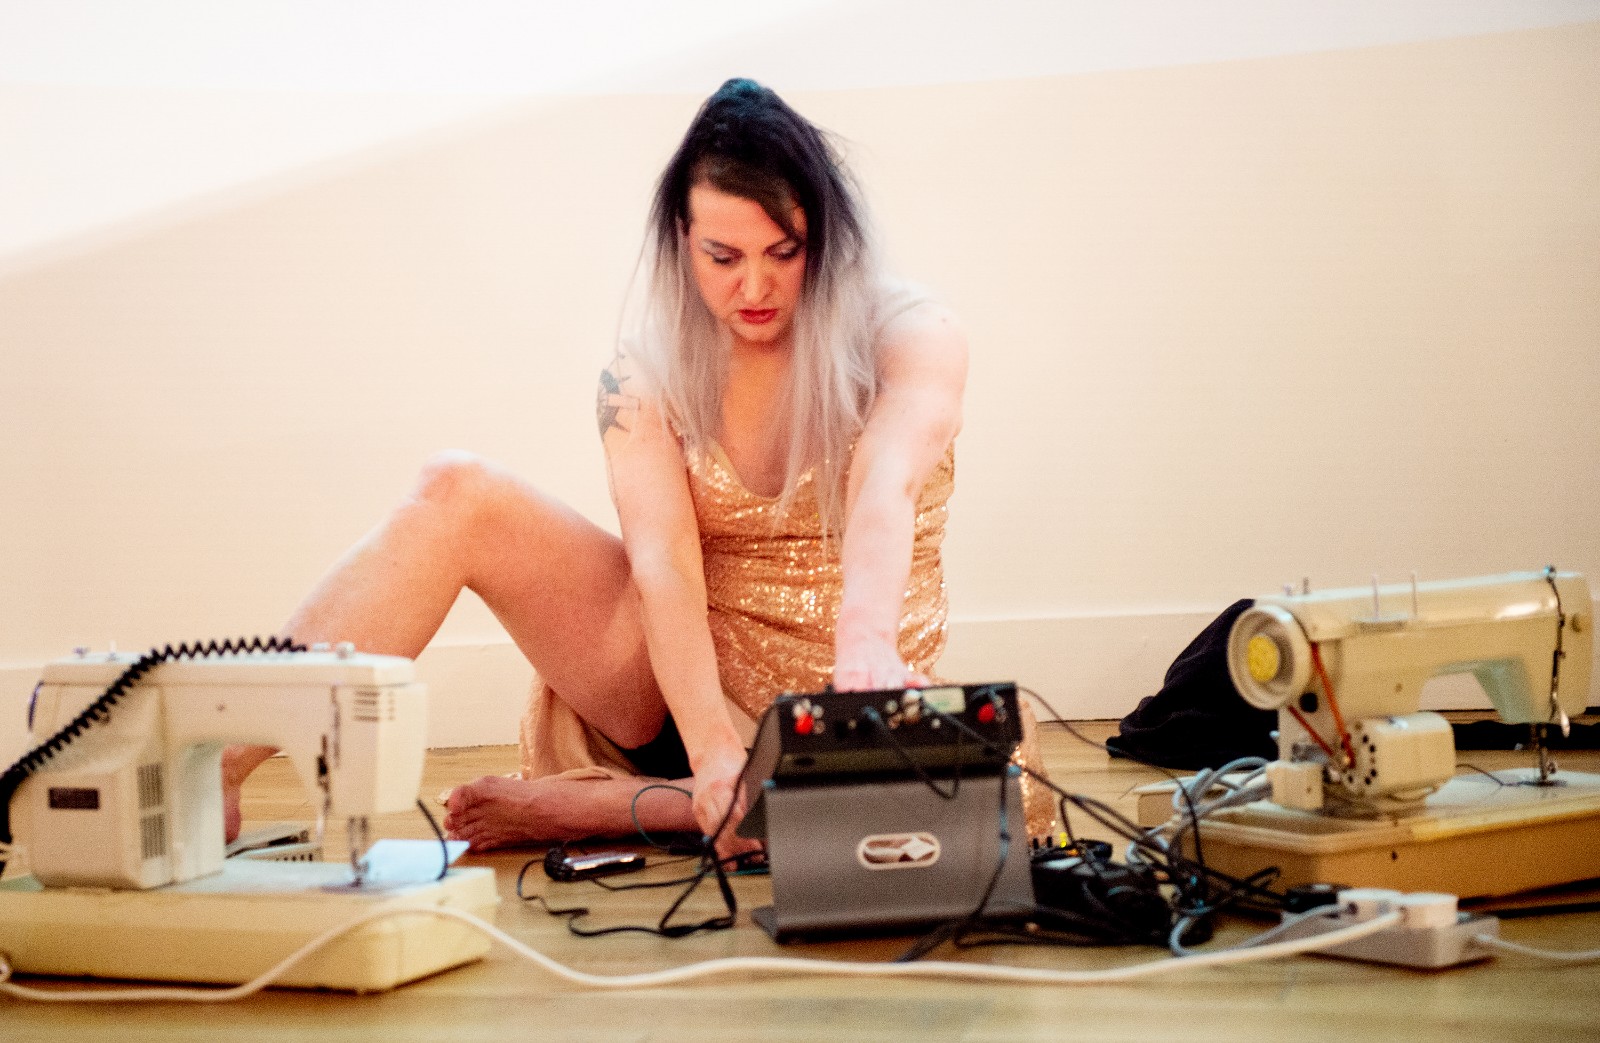 Performance artist, Needle Factory (Freda Wallace) performing at The Manchester Open 2020 exhibition